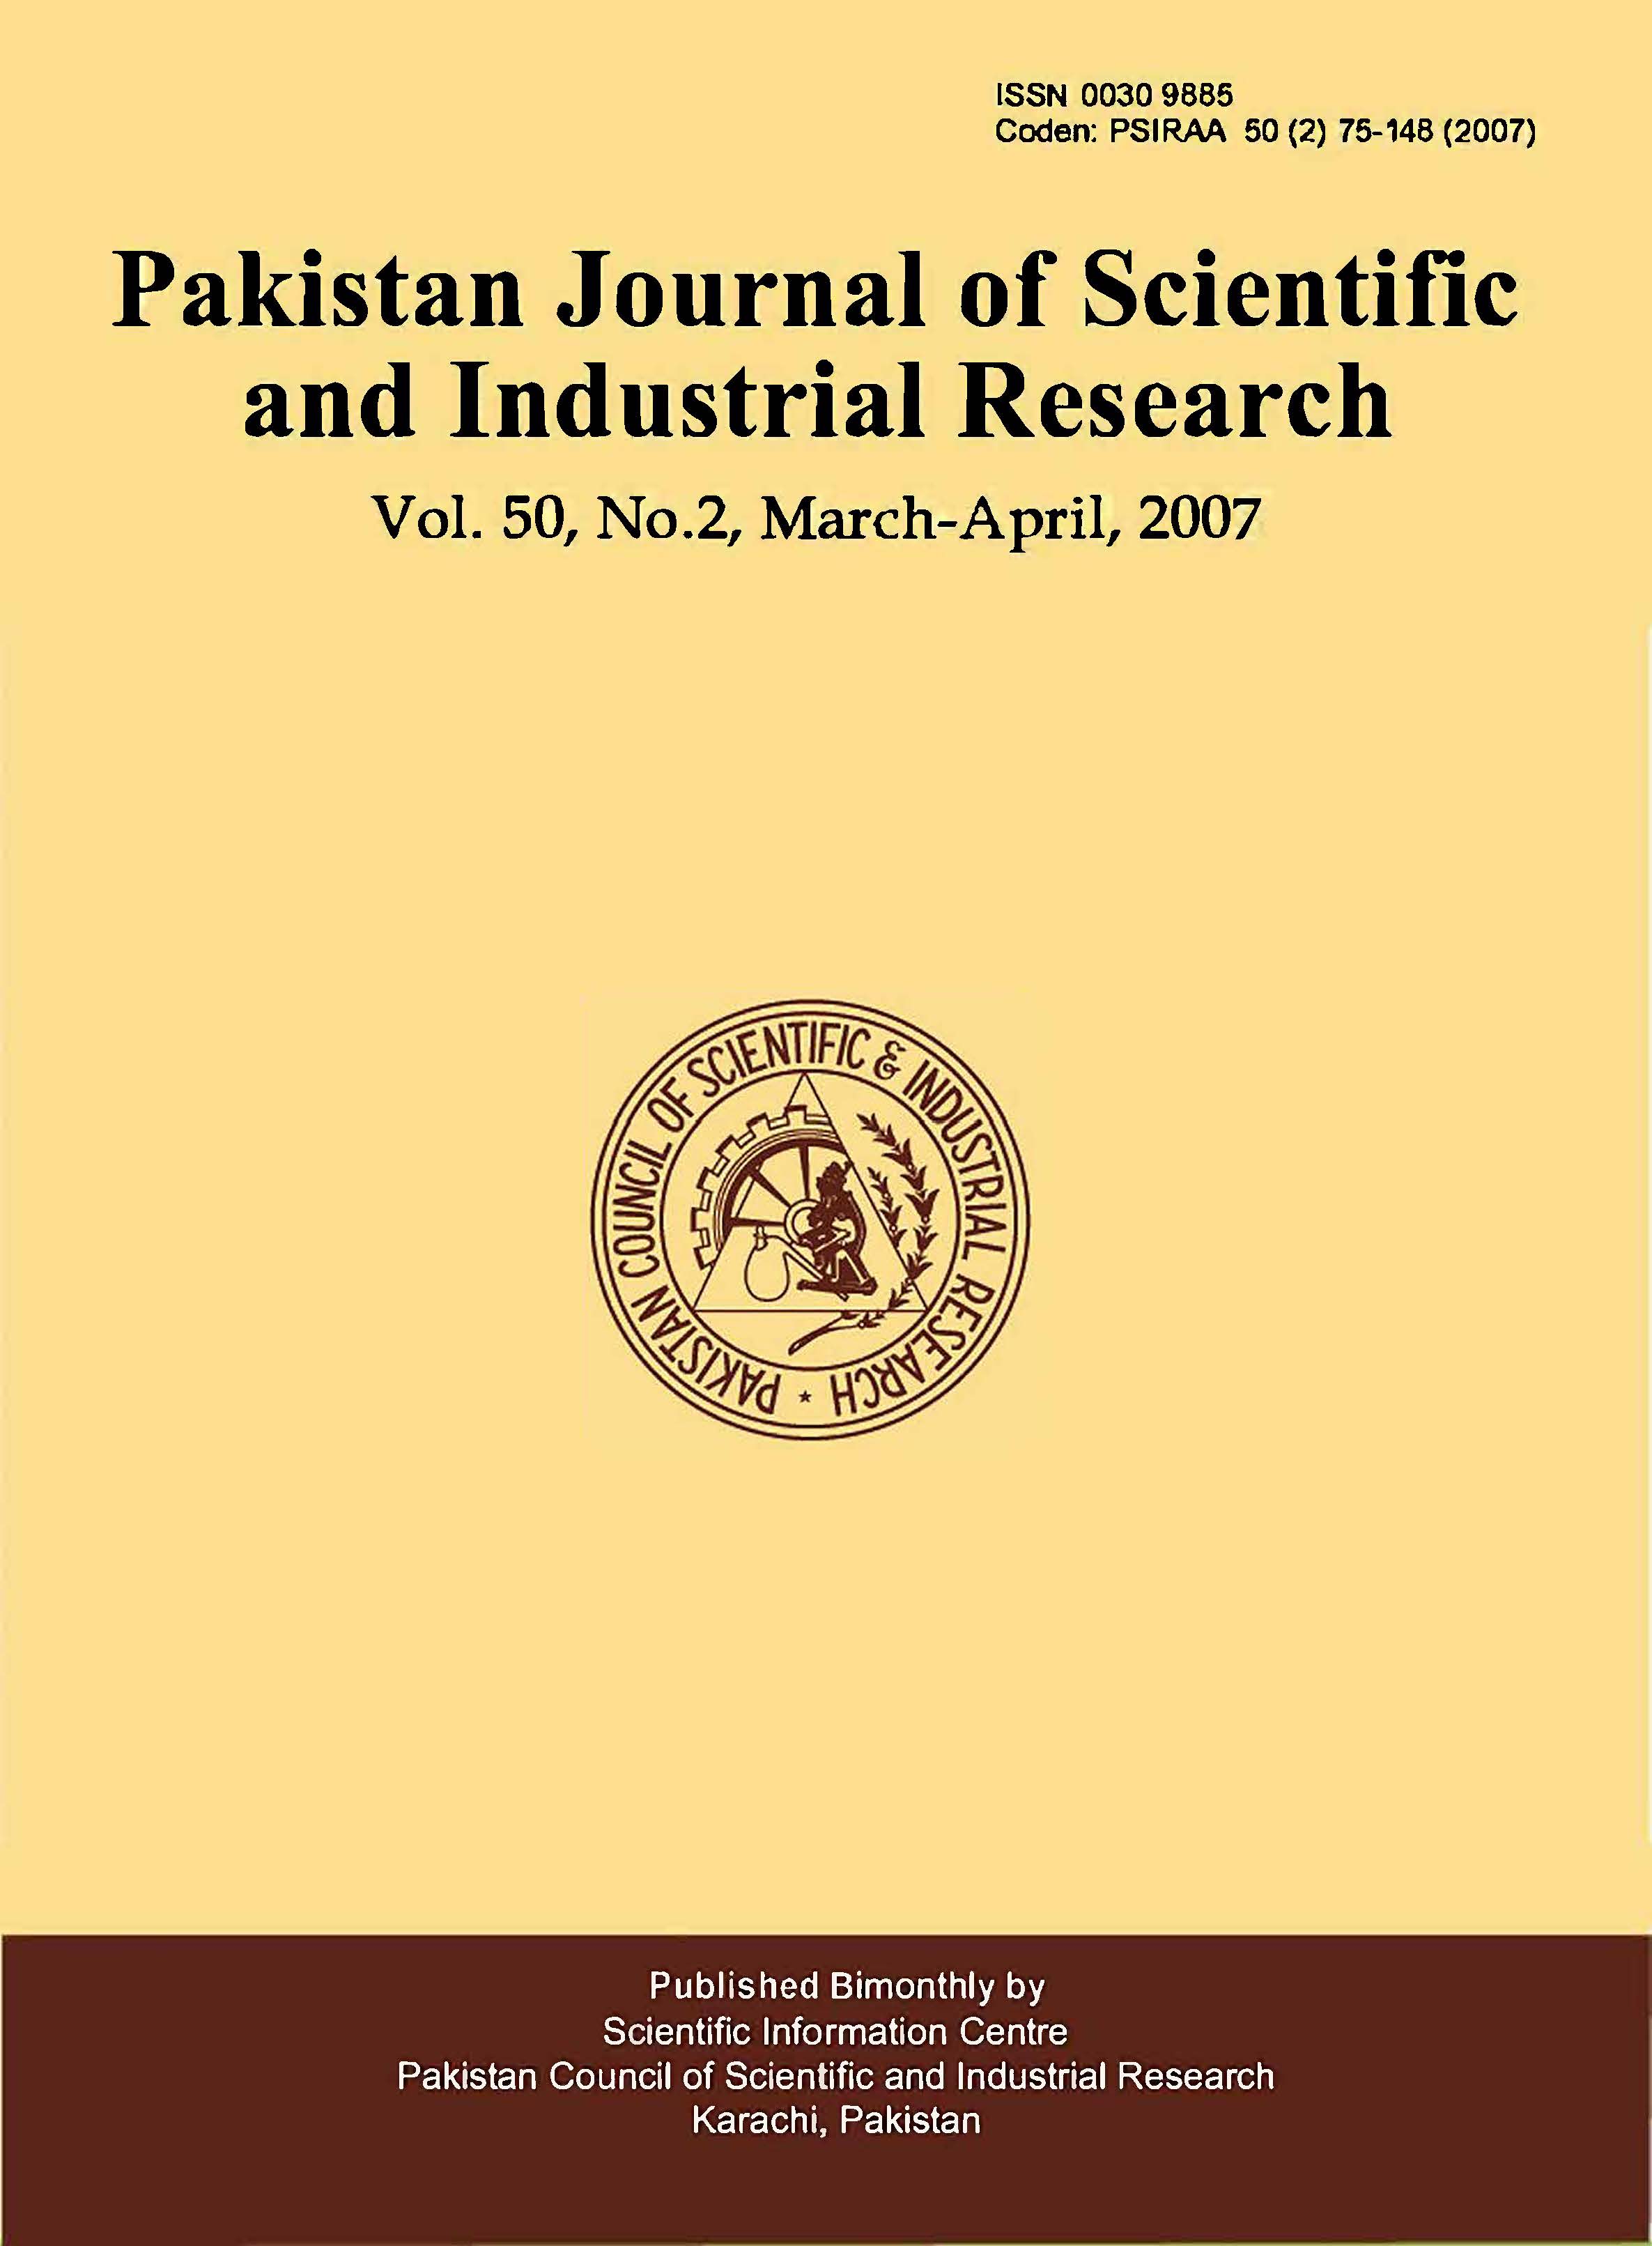 					View Vol. 50 No. 2 (2007): Pakistan Journal of Scientific and Industrial Research
				